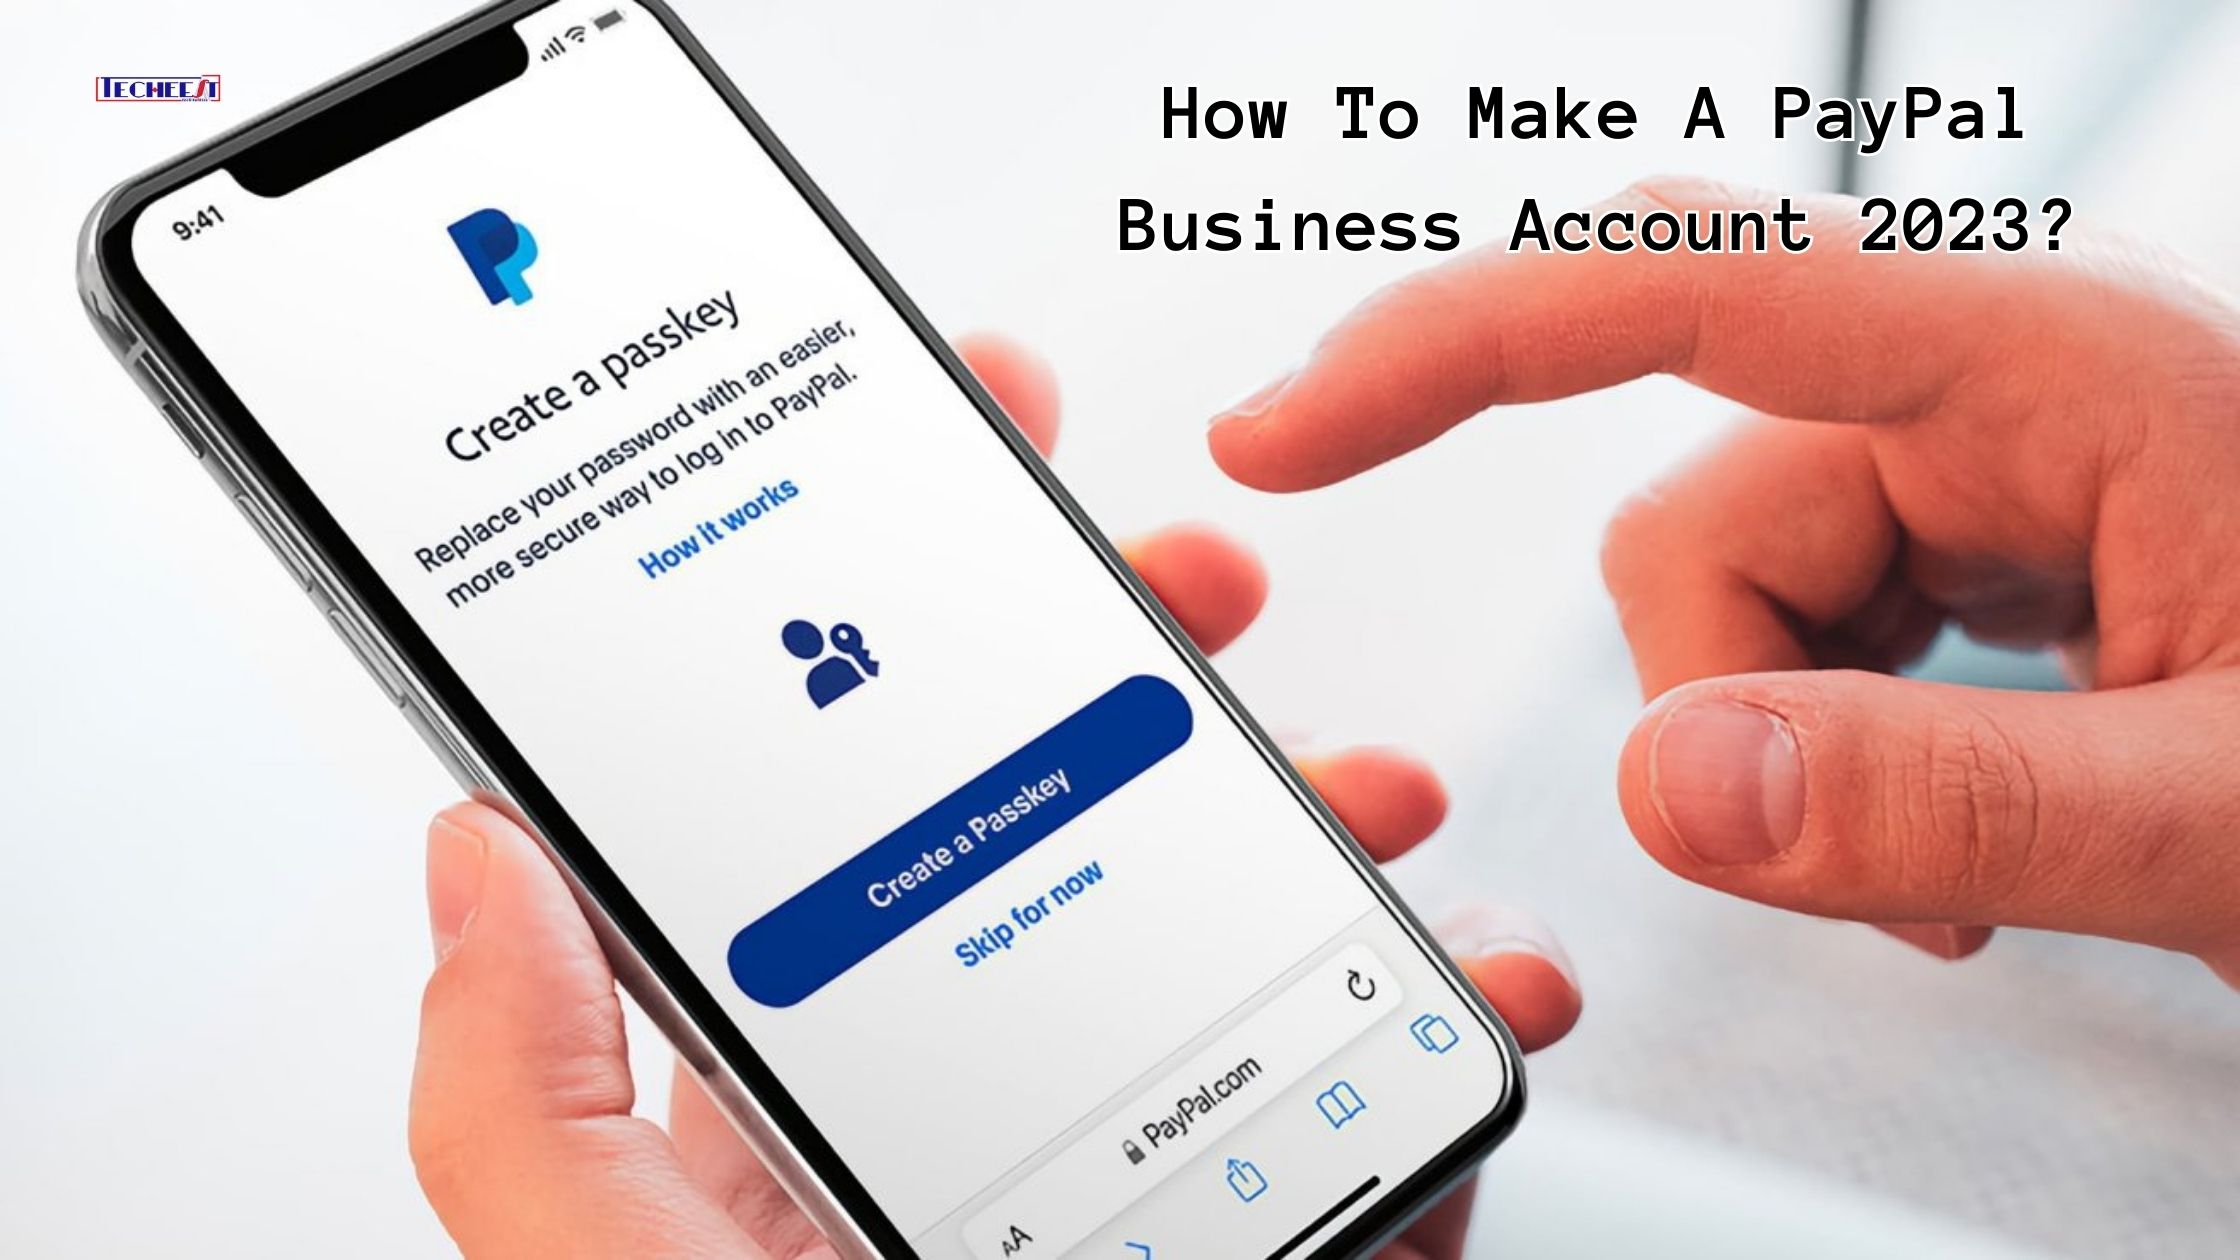 How To Make A PayPal Business Account 2023